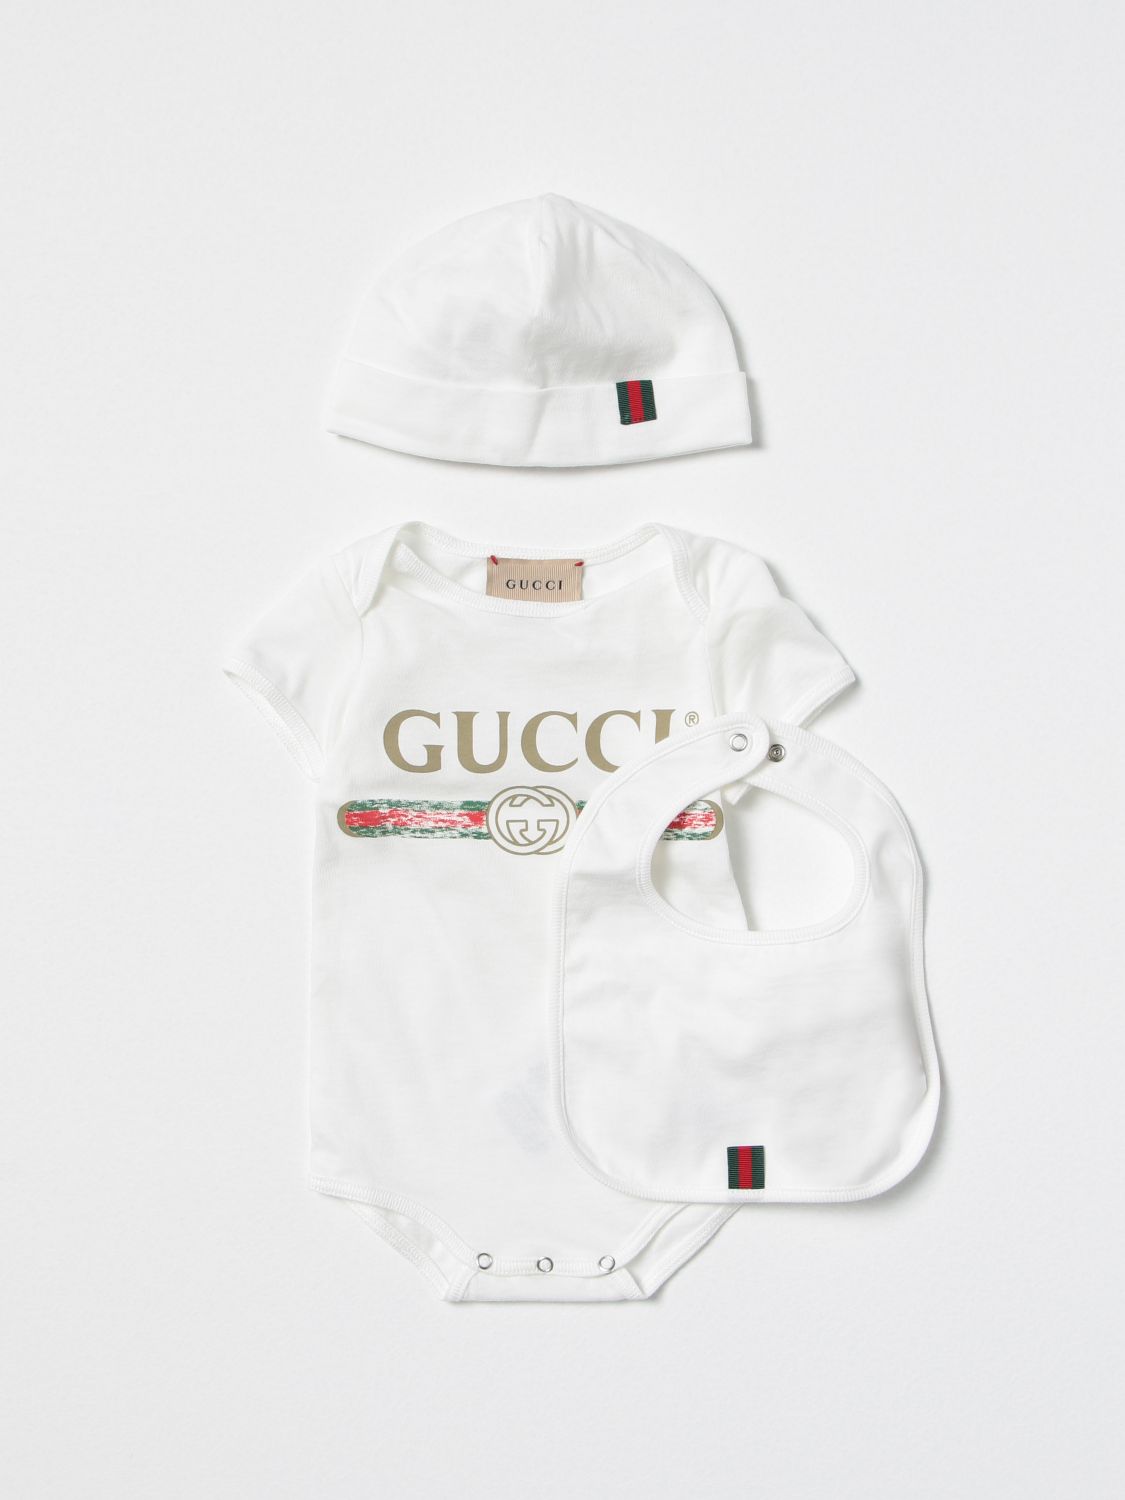 Scheur fout Diplomatieke kwesties GUCCI: bodysuit for baby - White | Gucci bodysuit 516326X9U05 online on  GIGLIO.COM